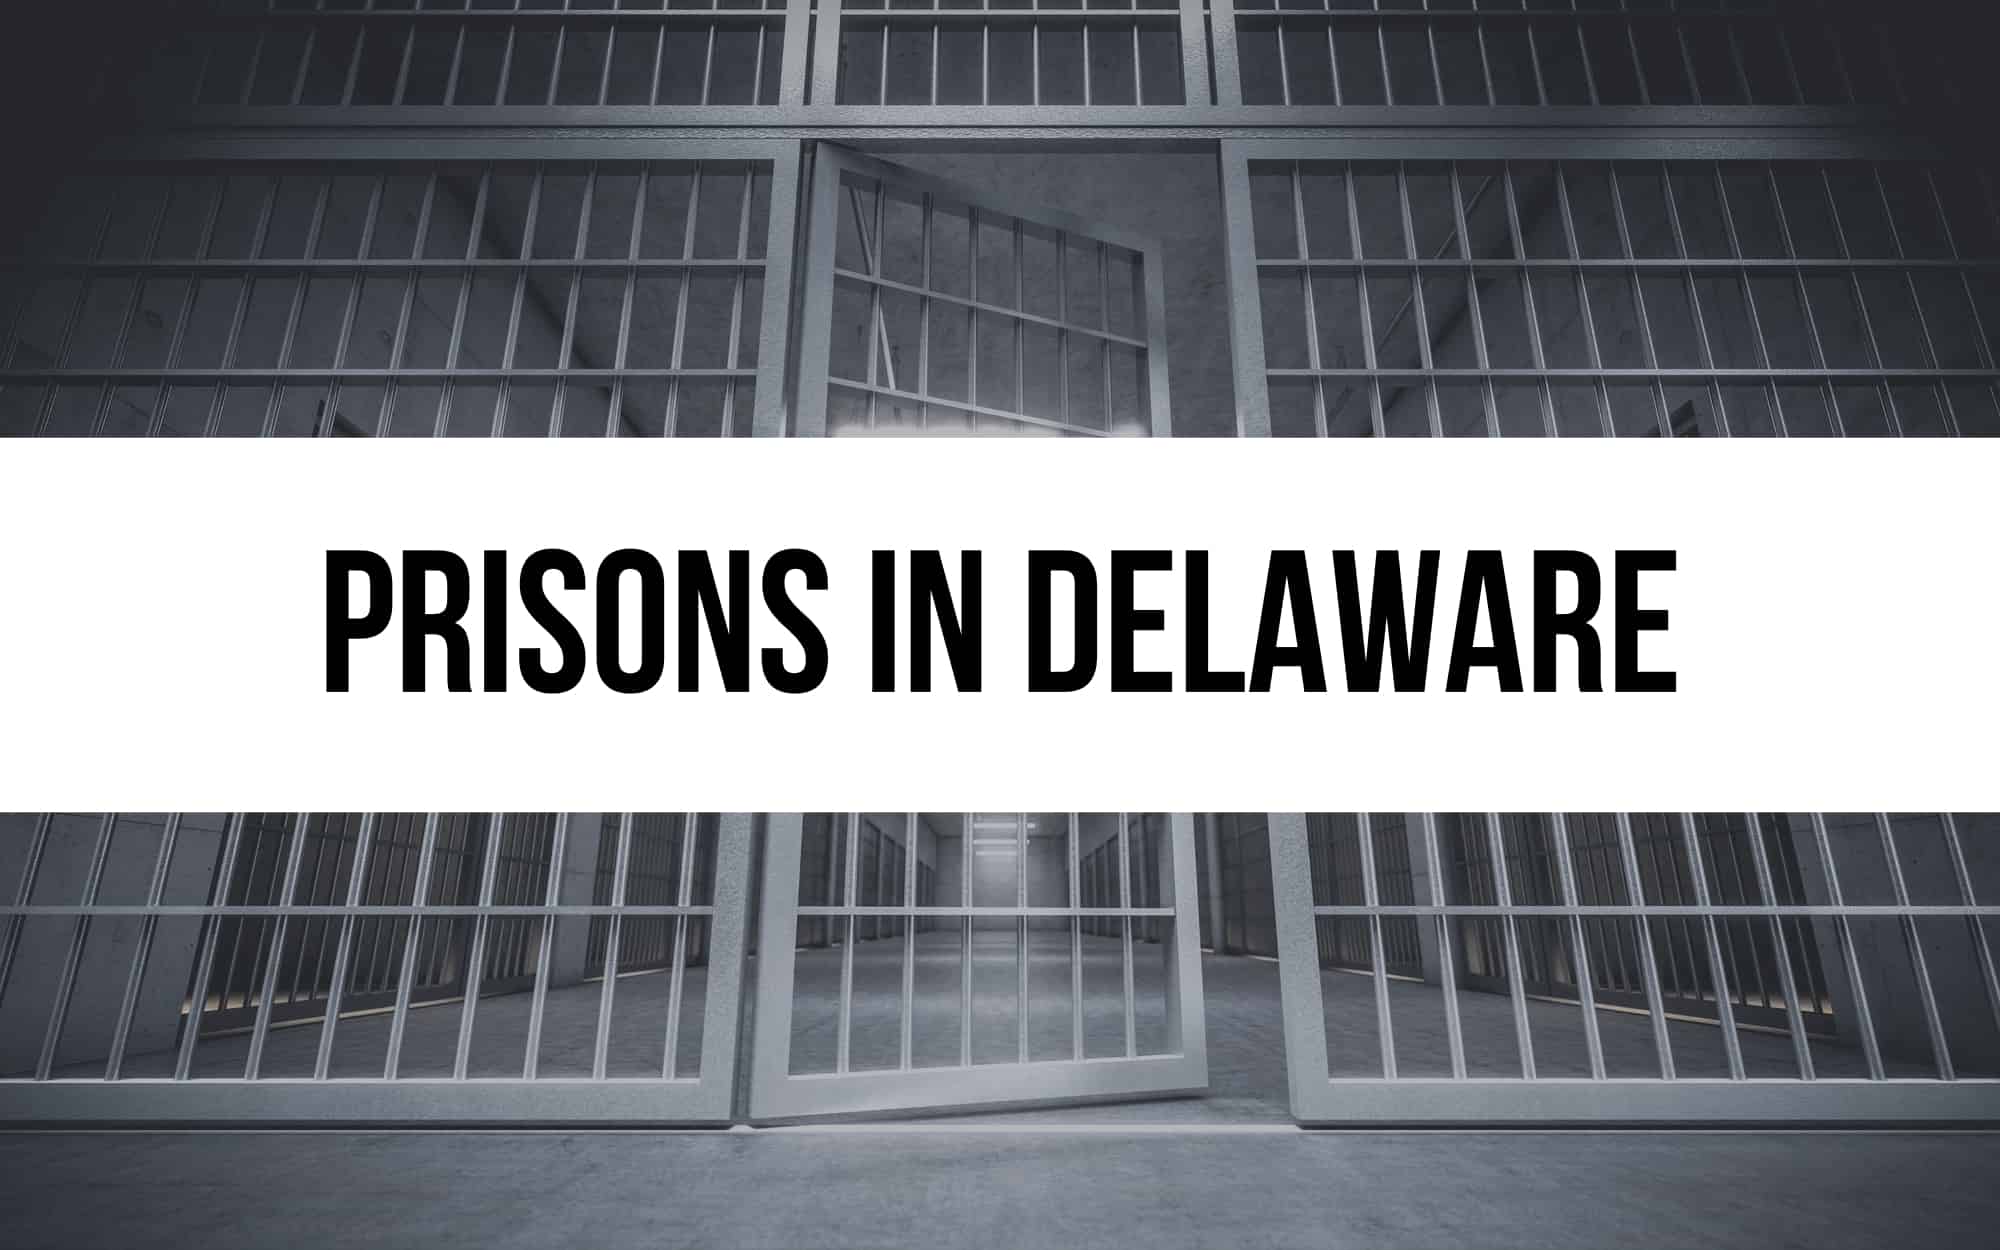 4 Prisons in Delaware – The Conditions and Challenges